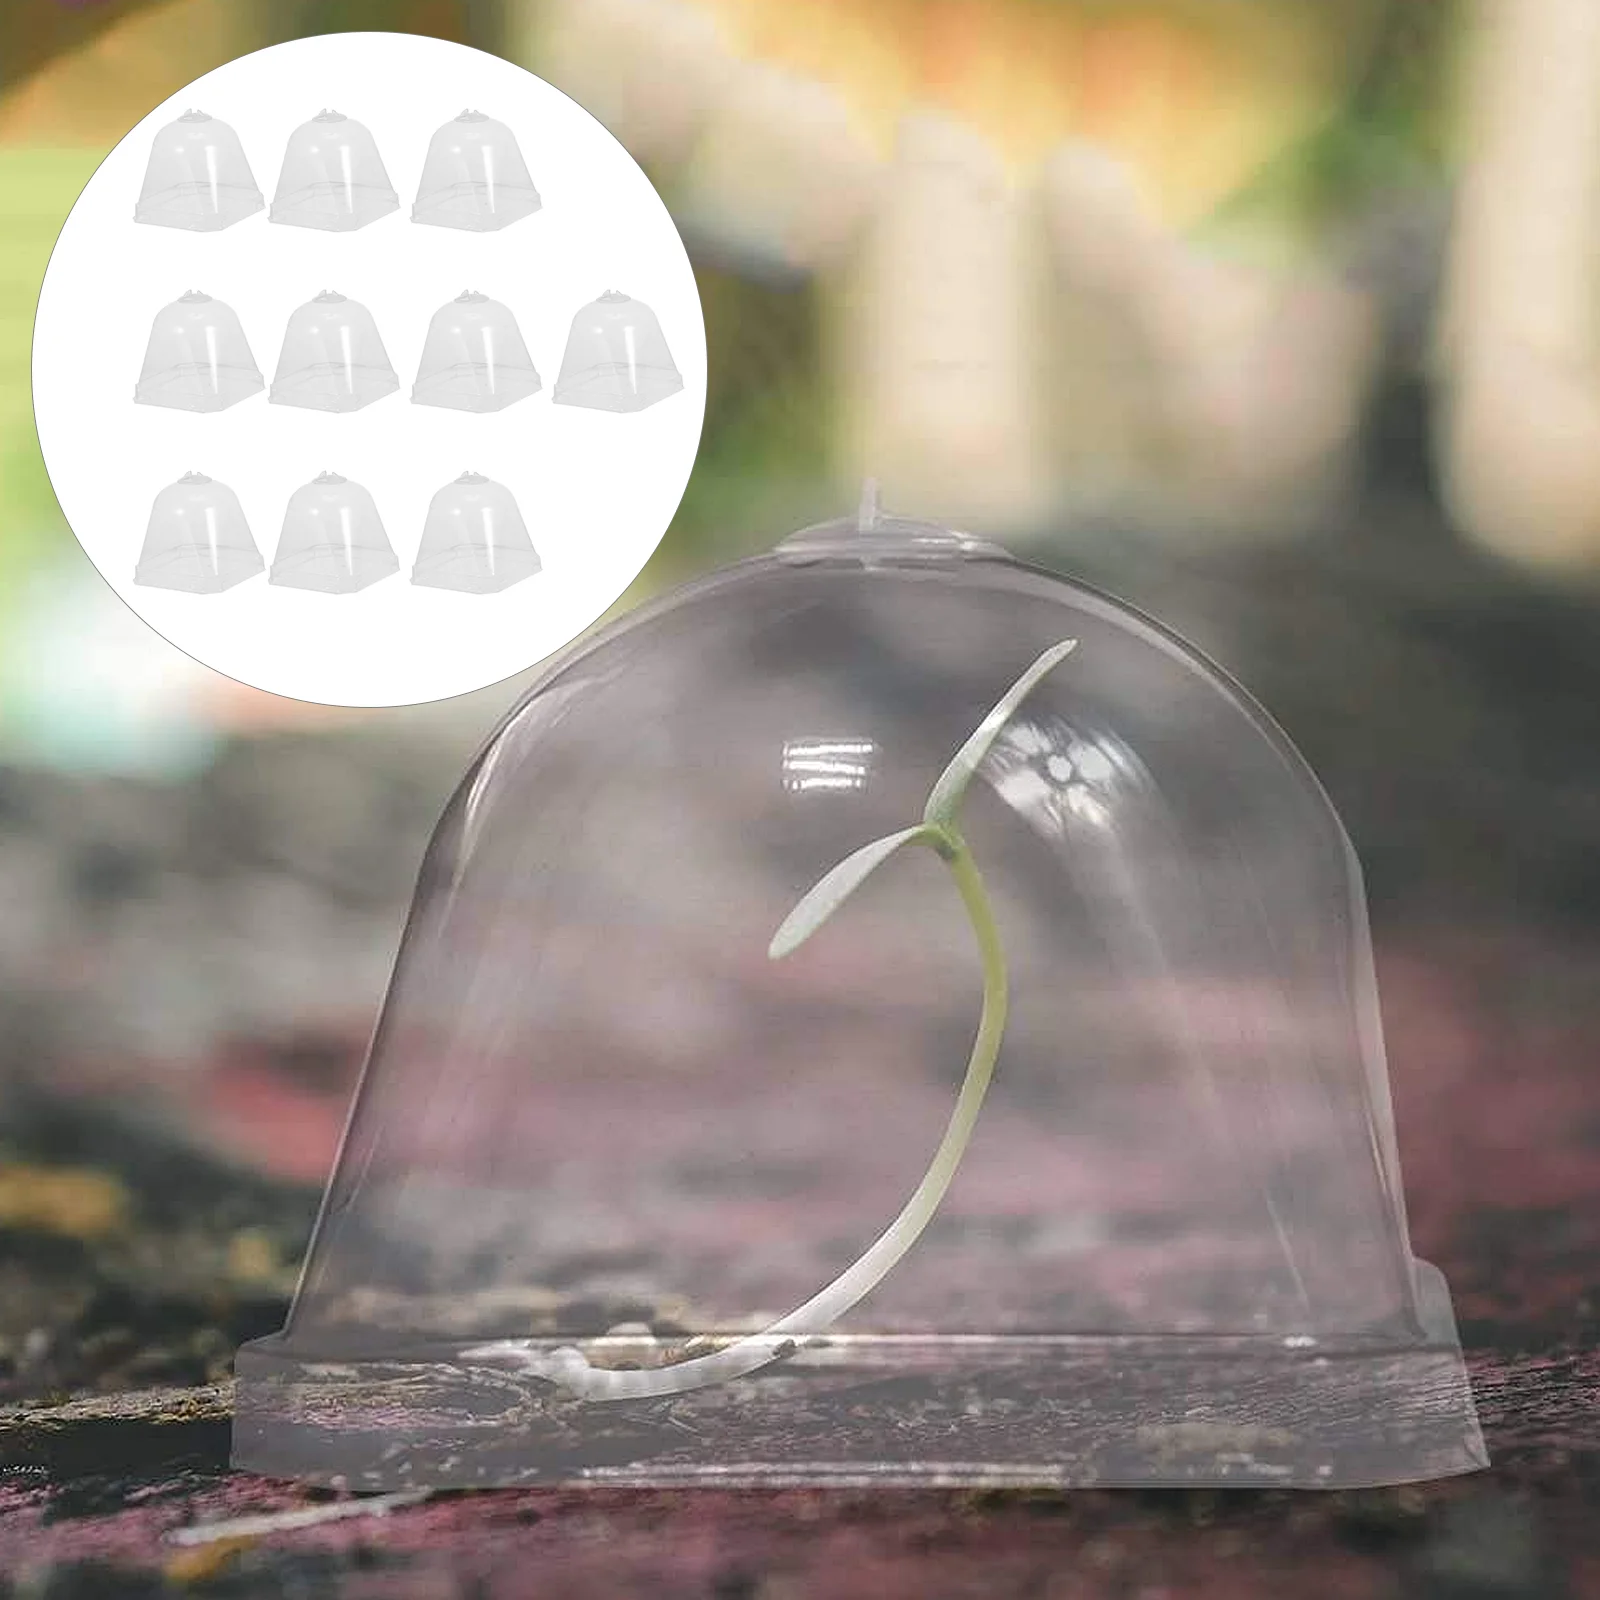 

Dome Cloche Cover Bell Garden Humidity Protector Covers Greenhouse Protection Freeze Vegetable Starting Mini Cloches Domes